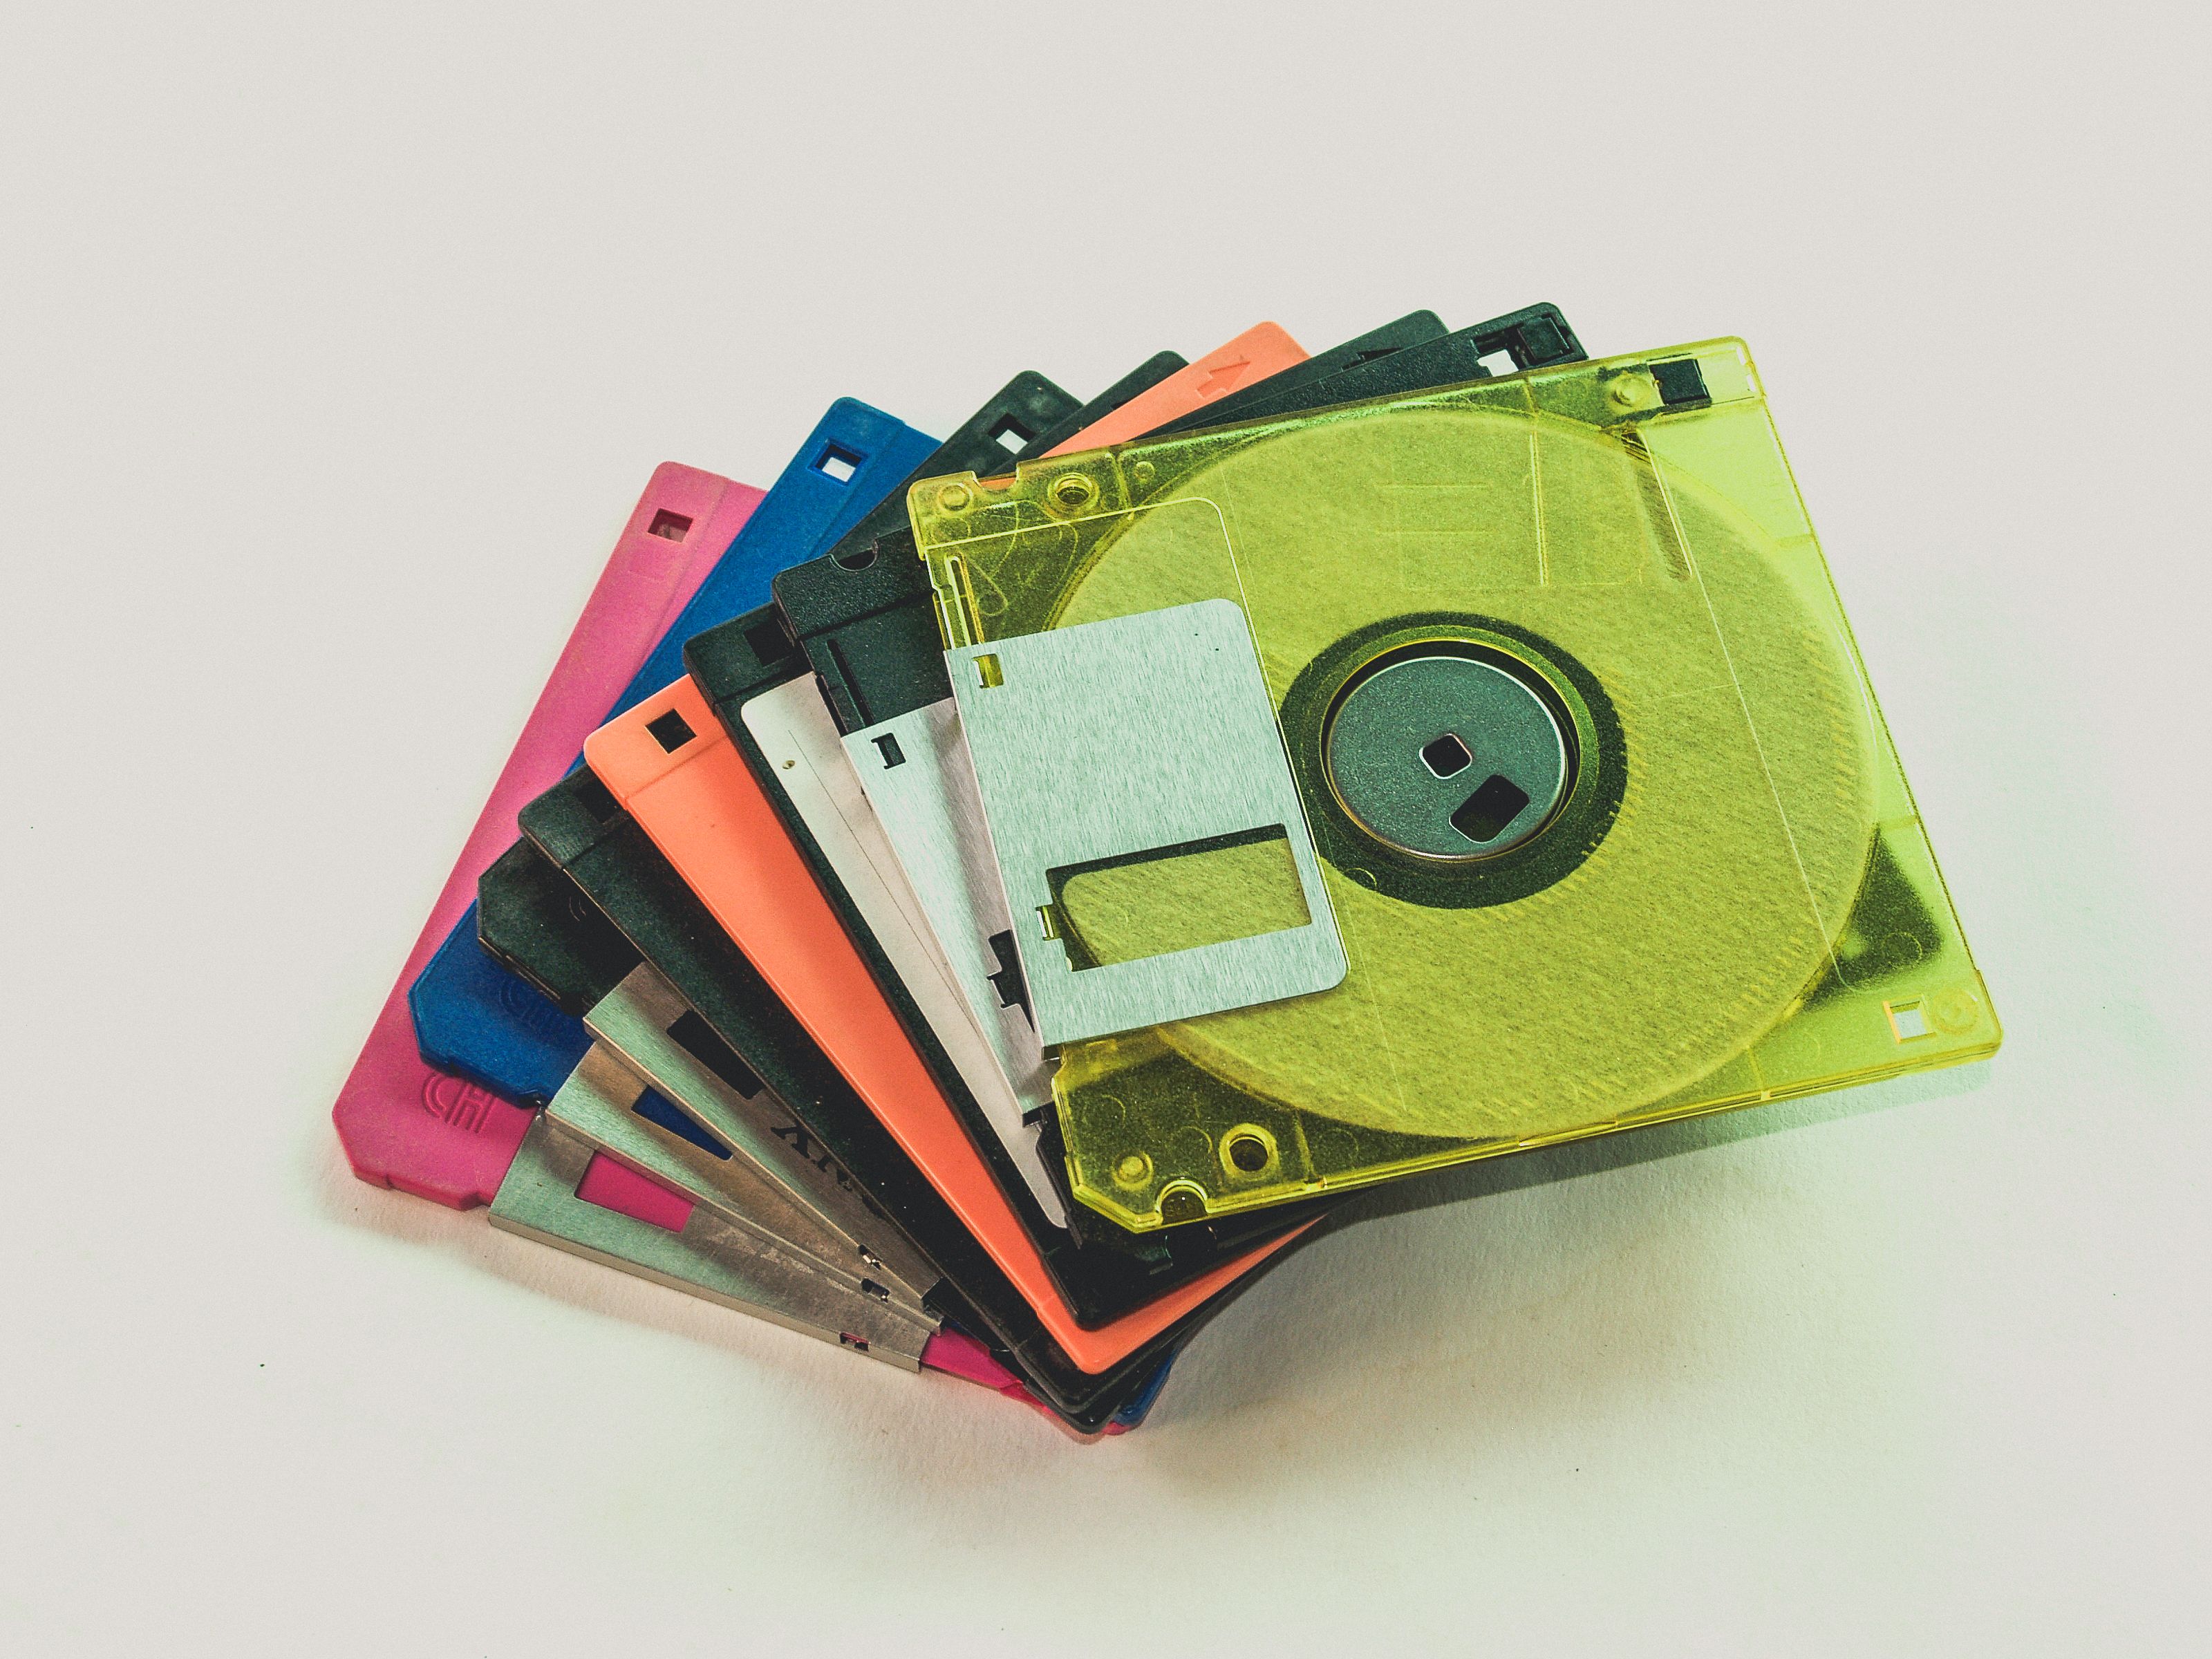 Floppy Disk Lot on White Surface · Free